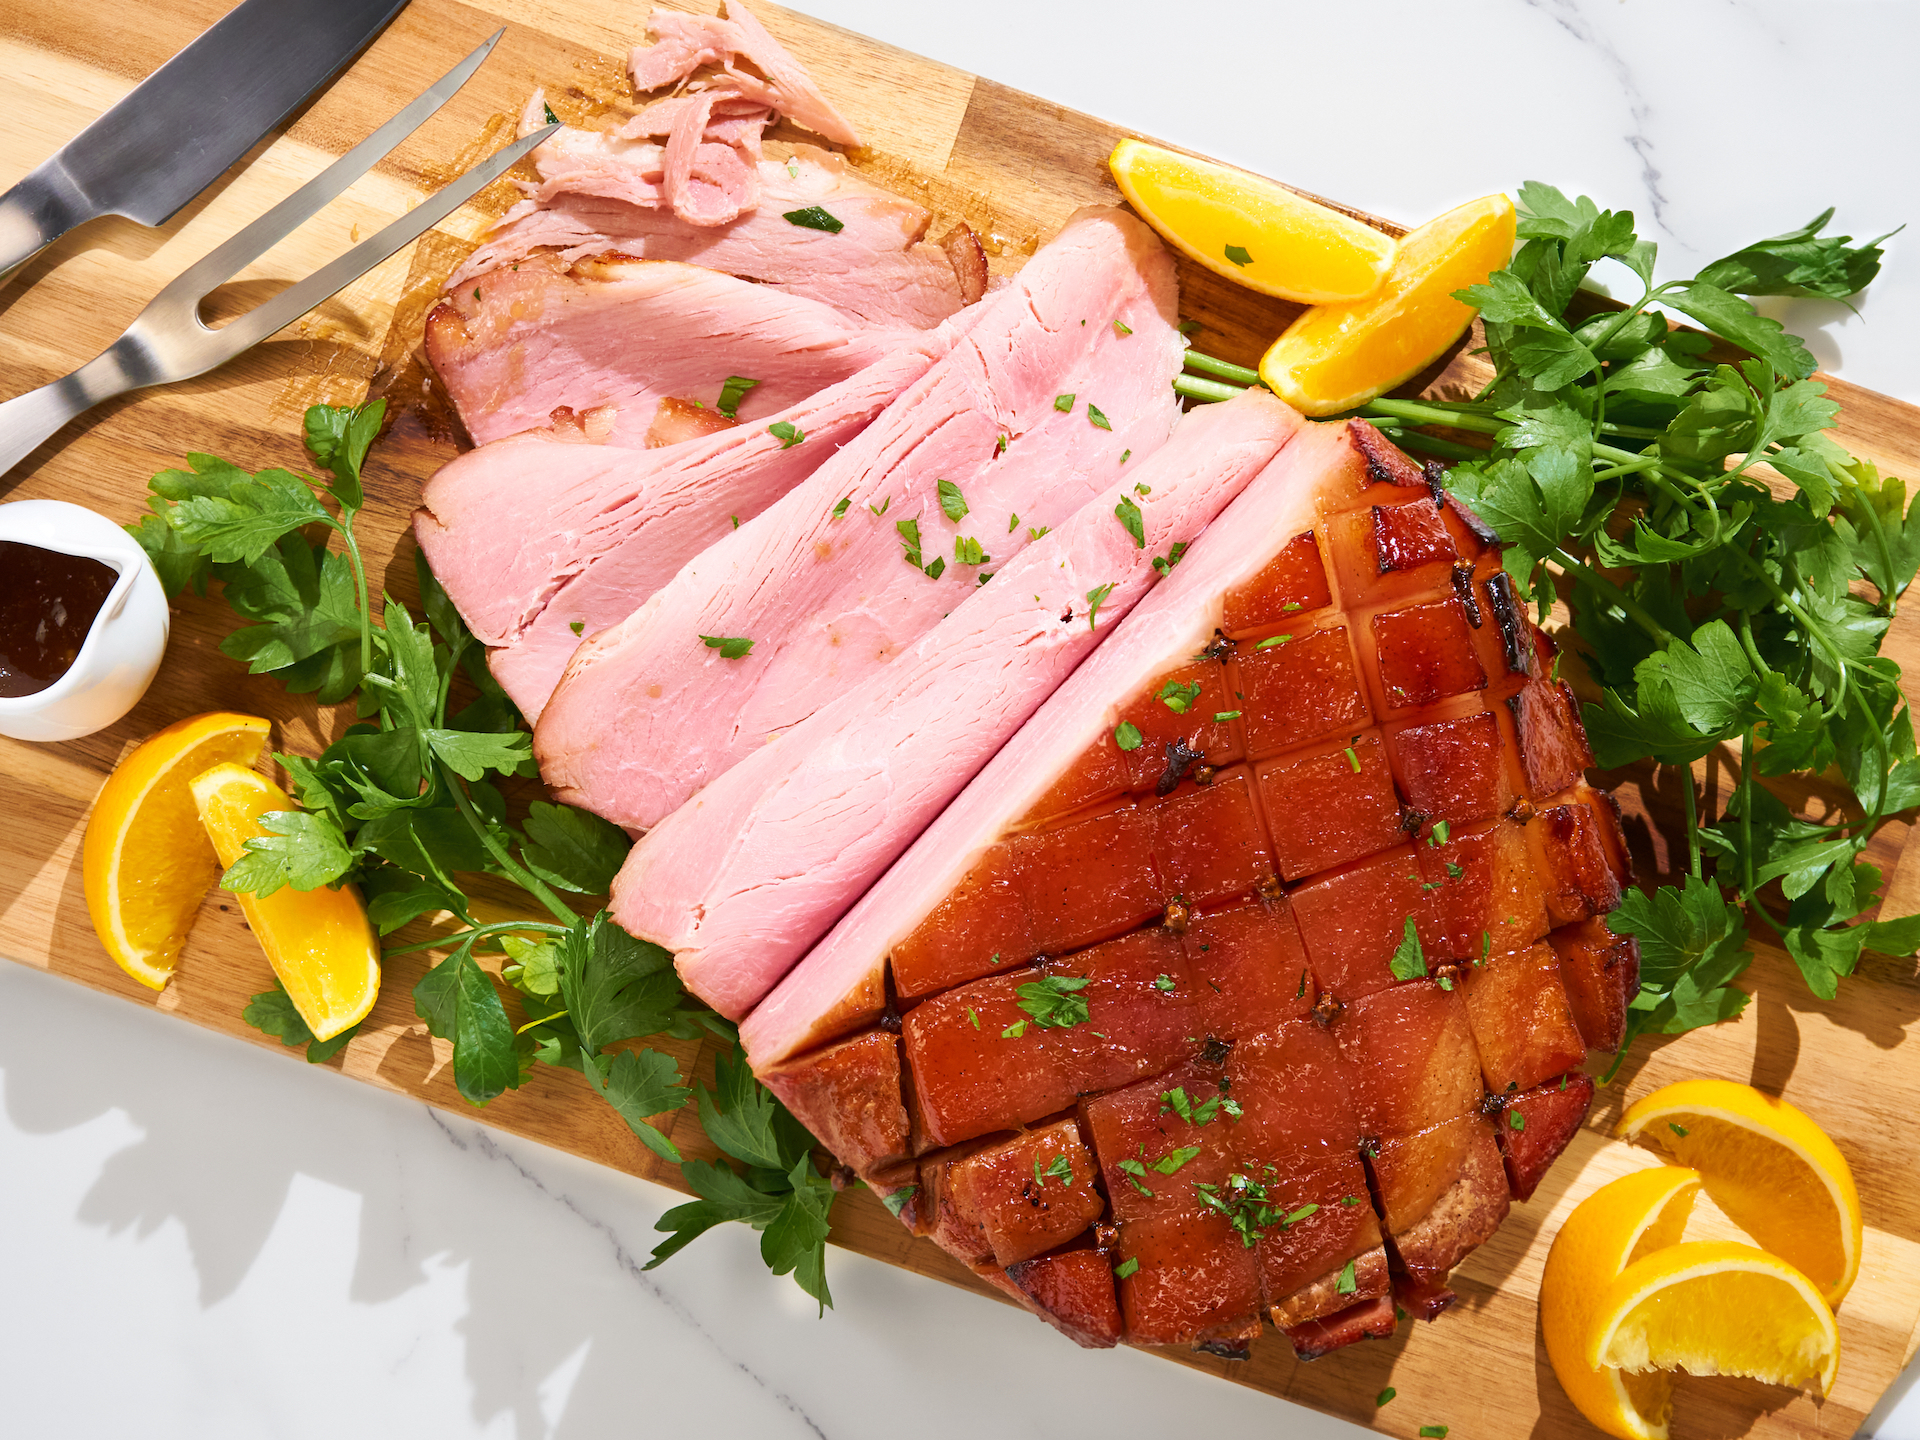 Holiday Glazed Baked Ham - Ahead of Thyme